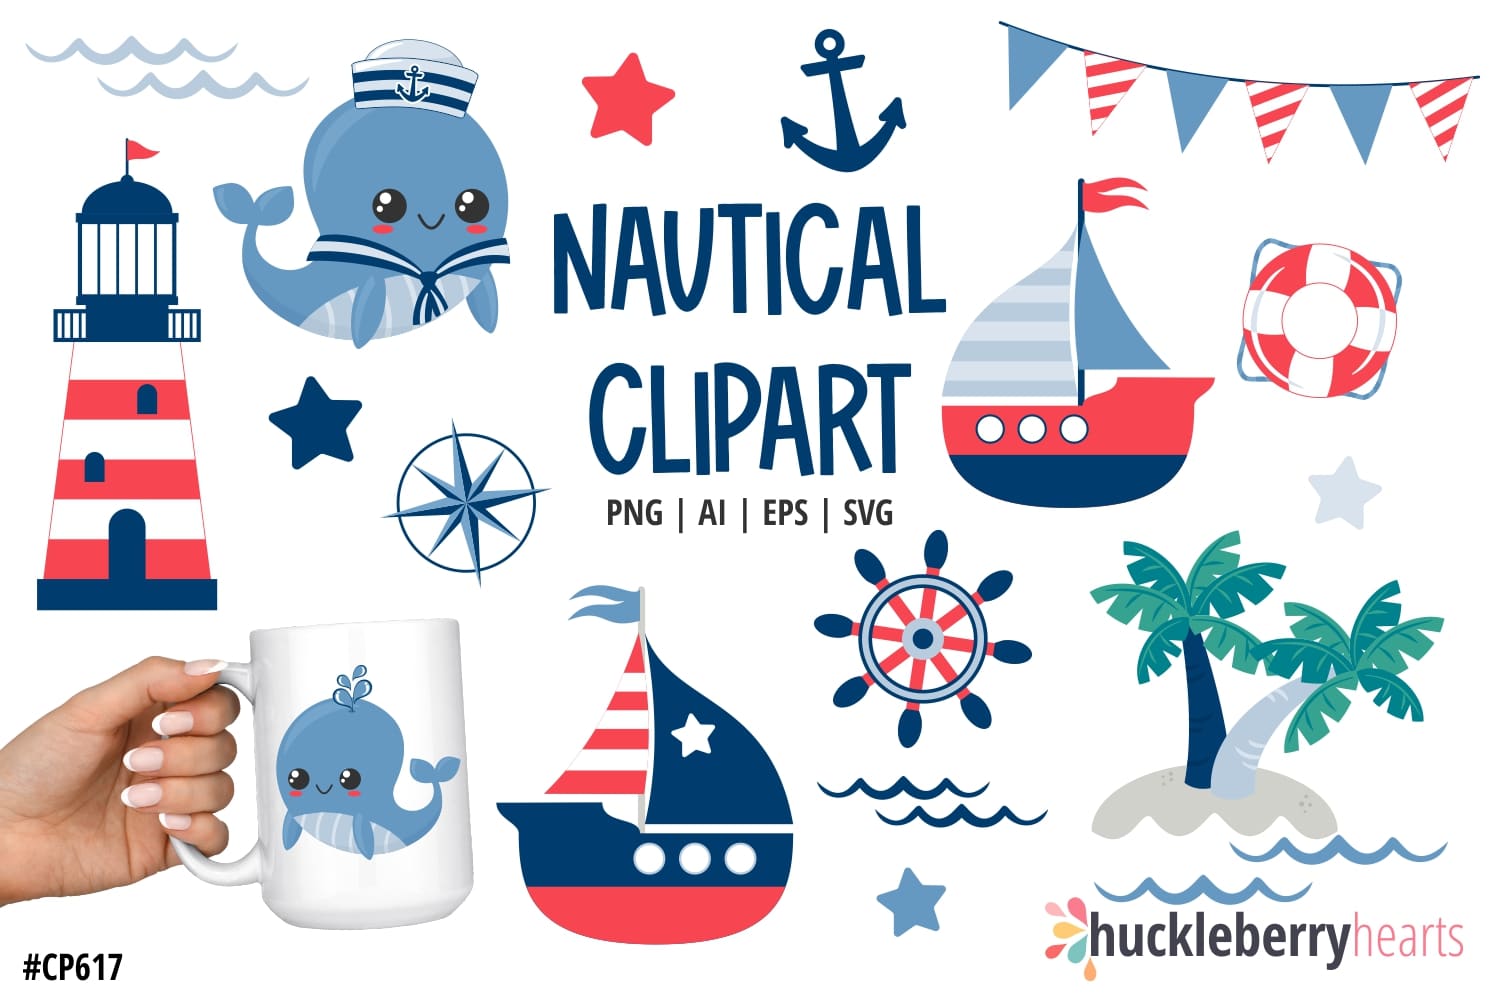 Assorted nautical themed clipart set